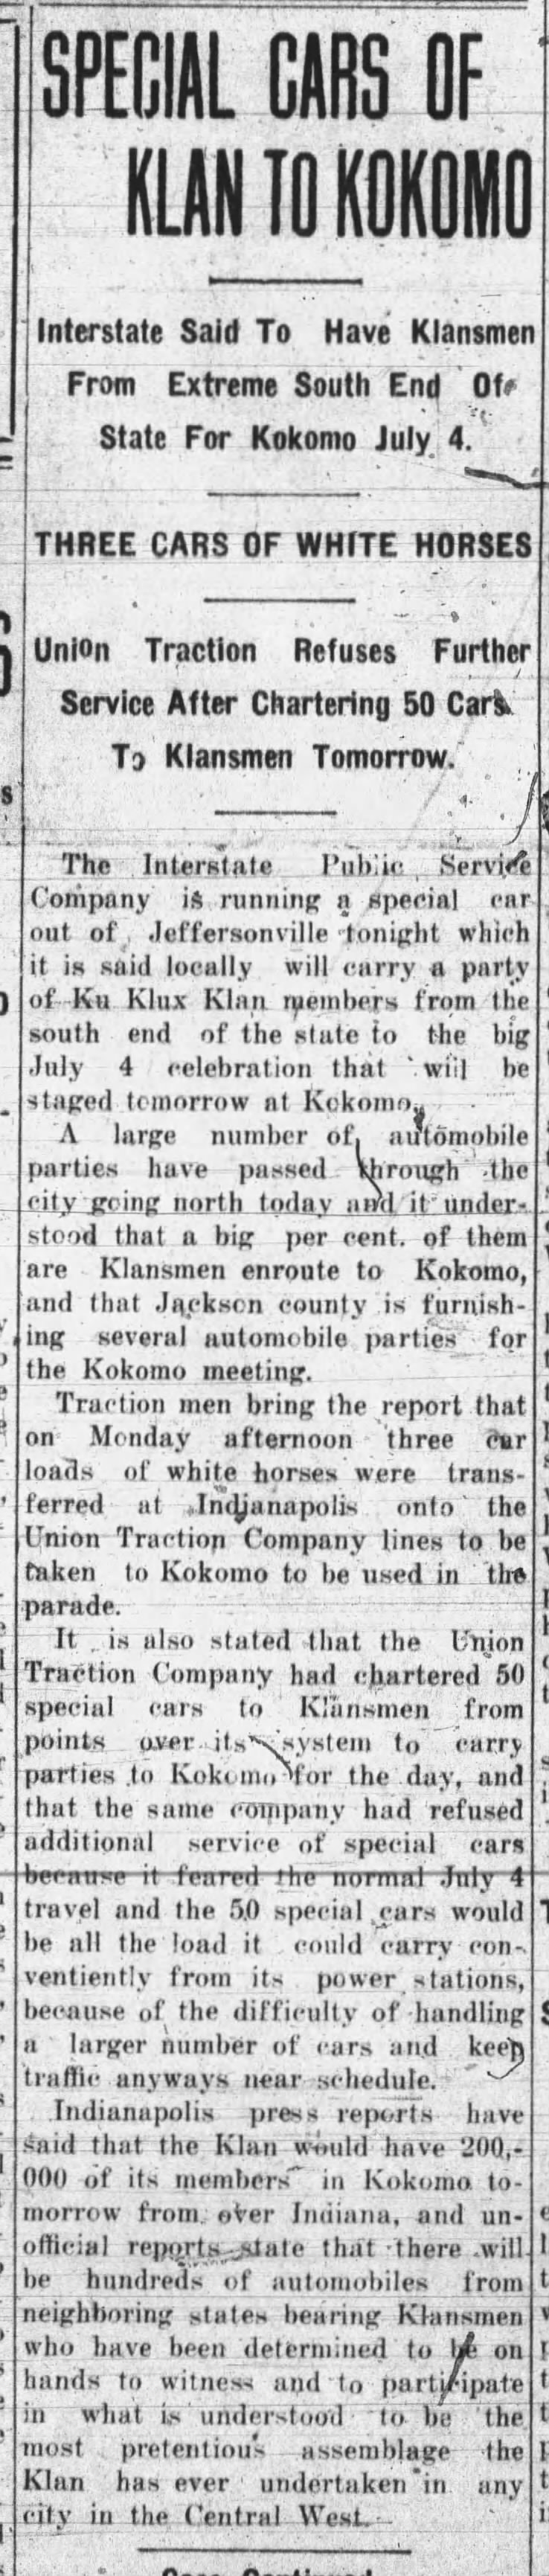 Union Traction to transport 50 carloads of Klansmen to Kokomo, Indiana for July 4, 1923